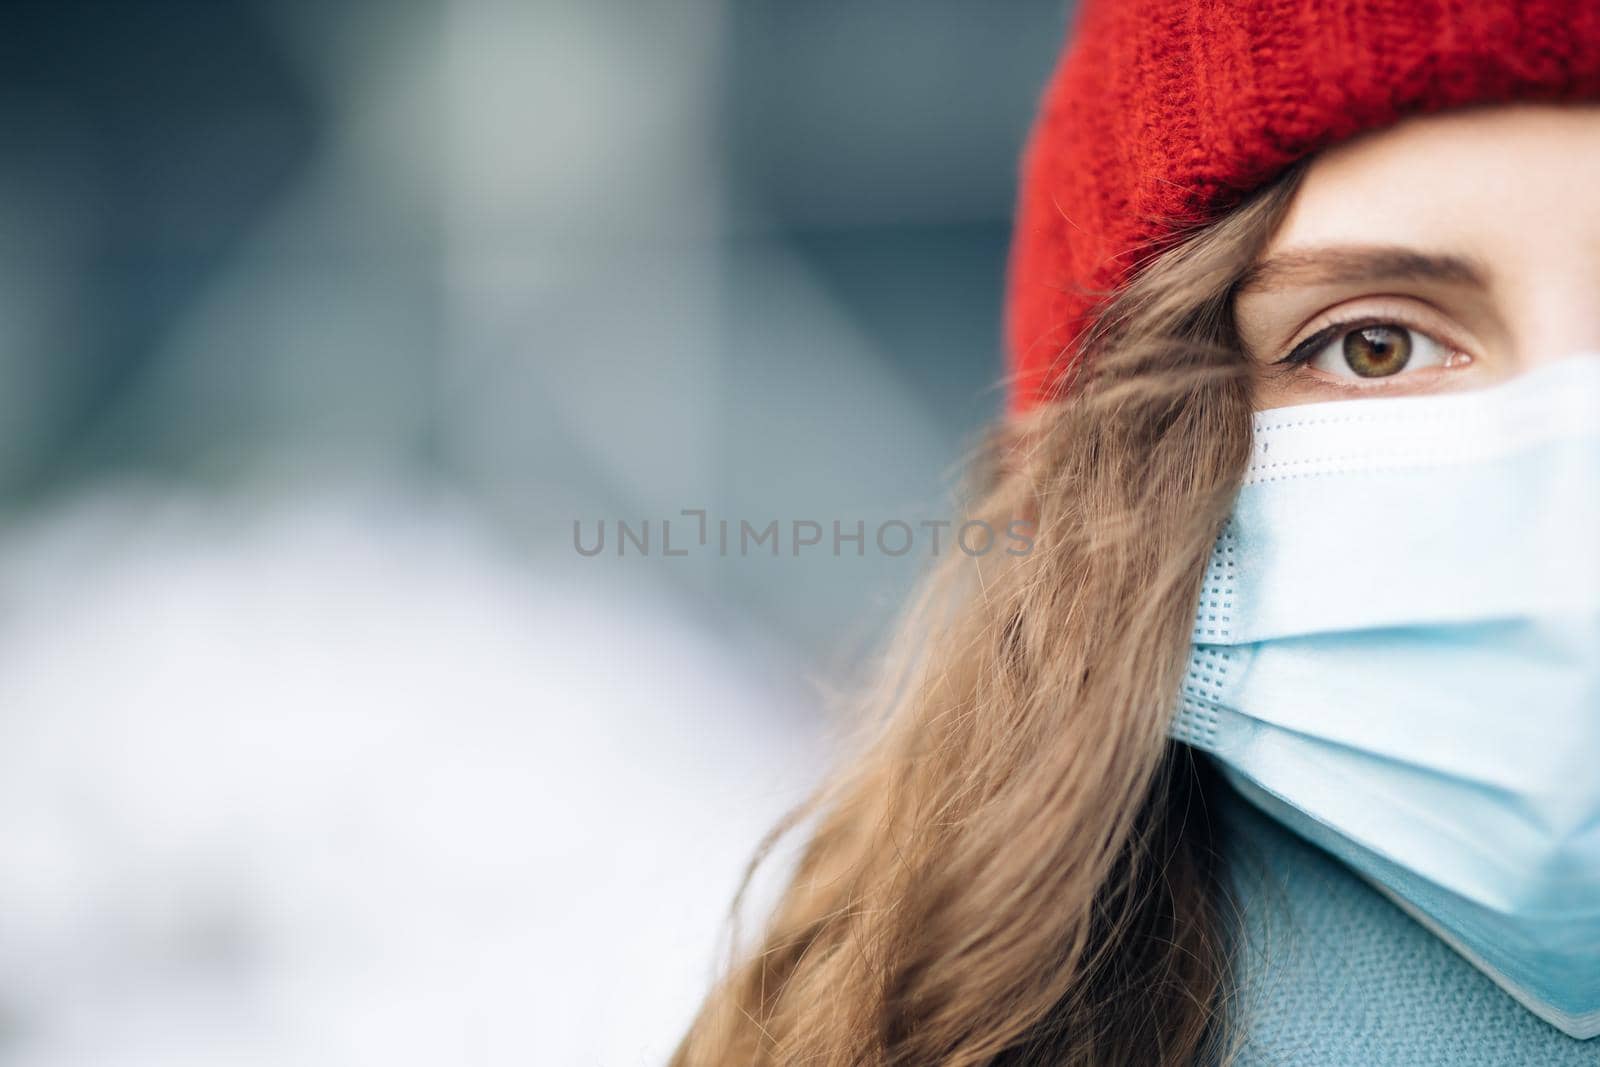 Close up of female half face at street . Portrait of caucasian woman looking at camera. Curly haired woman wears protective mask to avoid contaminating coronavirus. Health and safety concept.